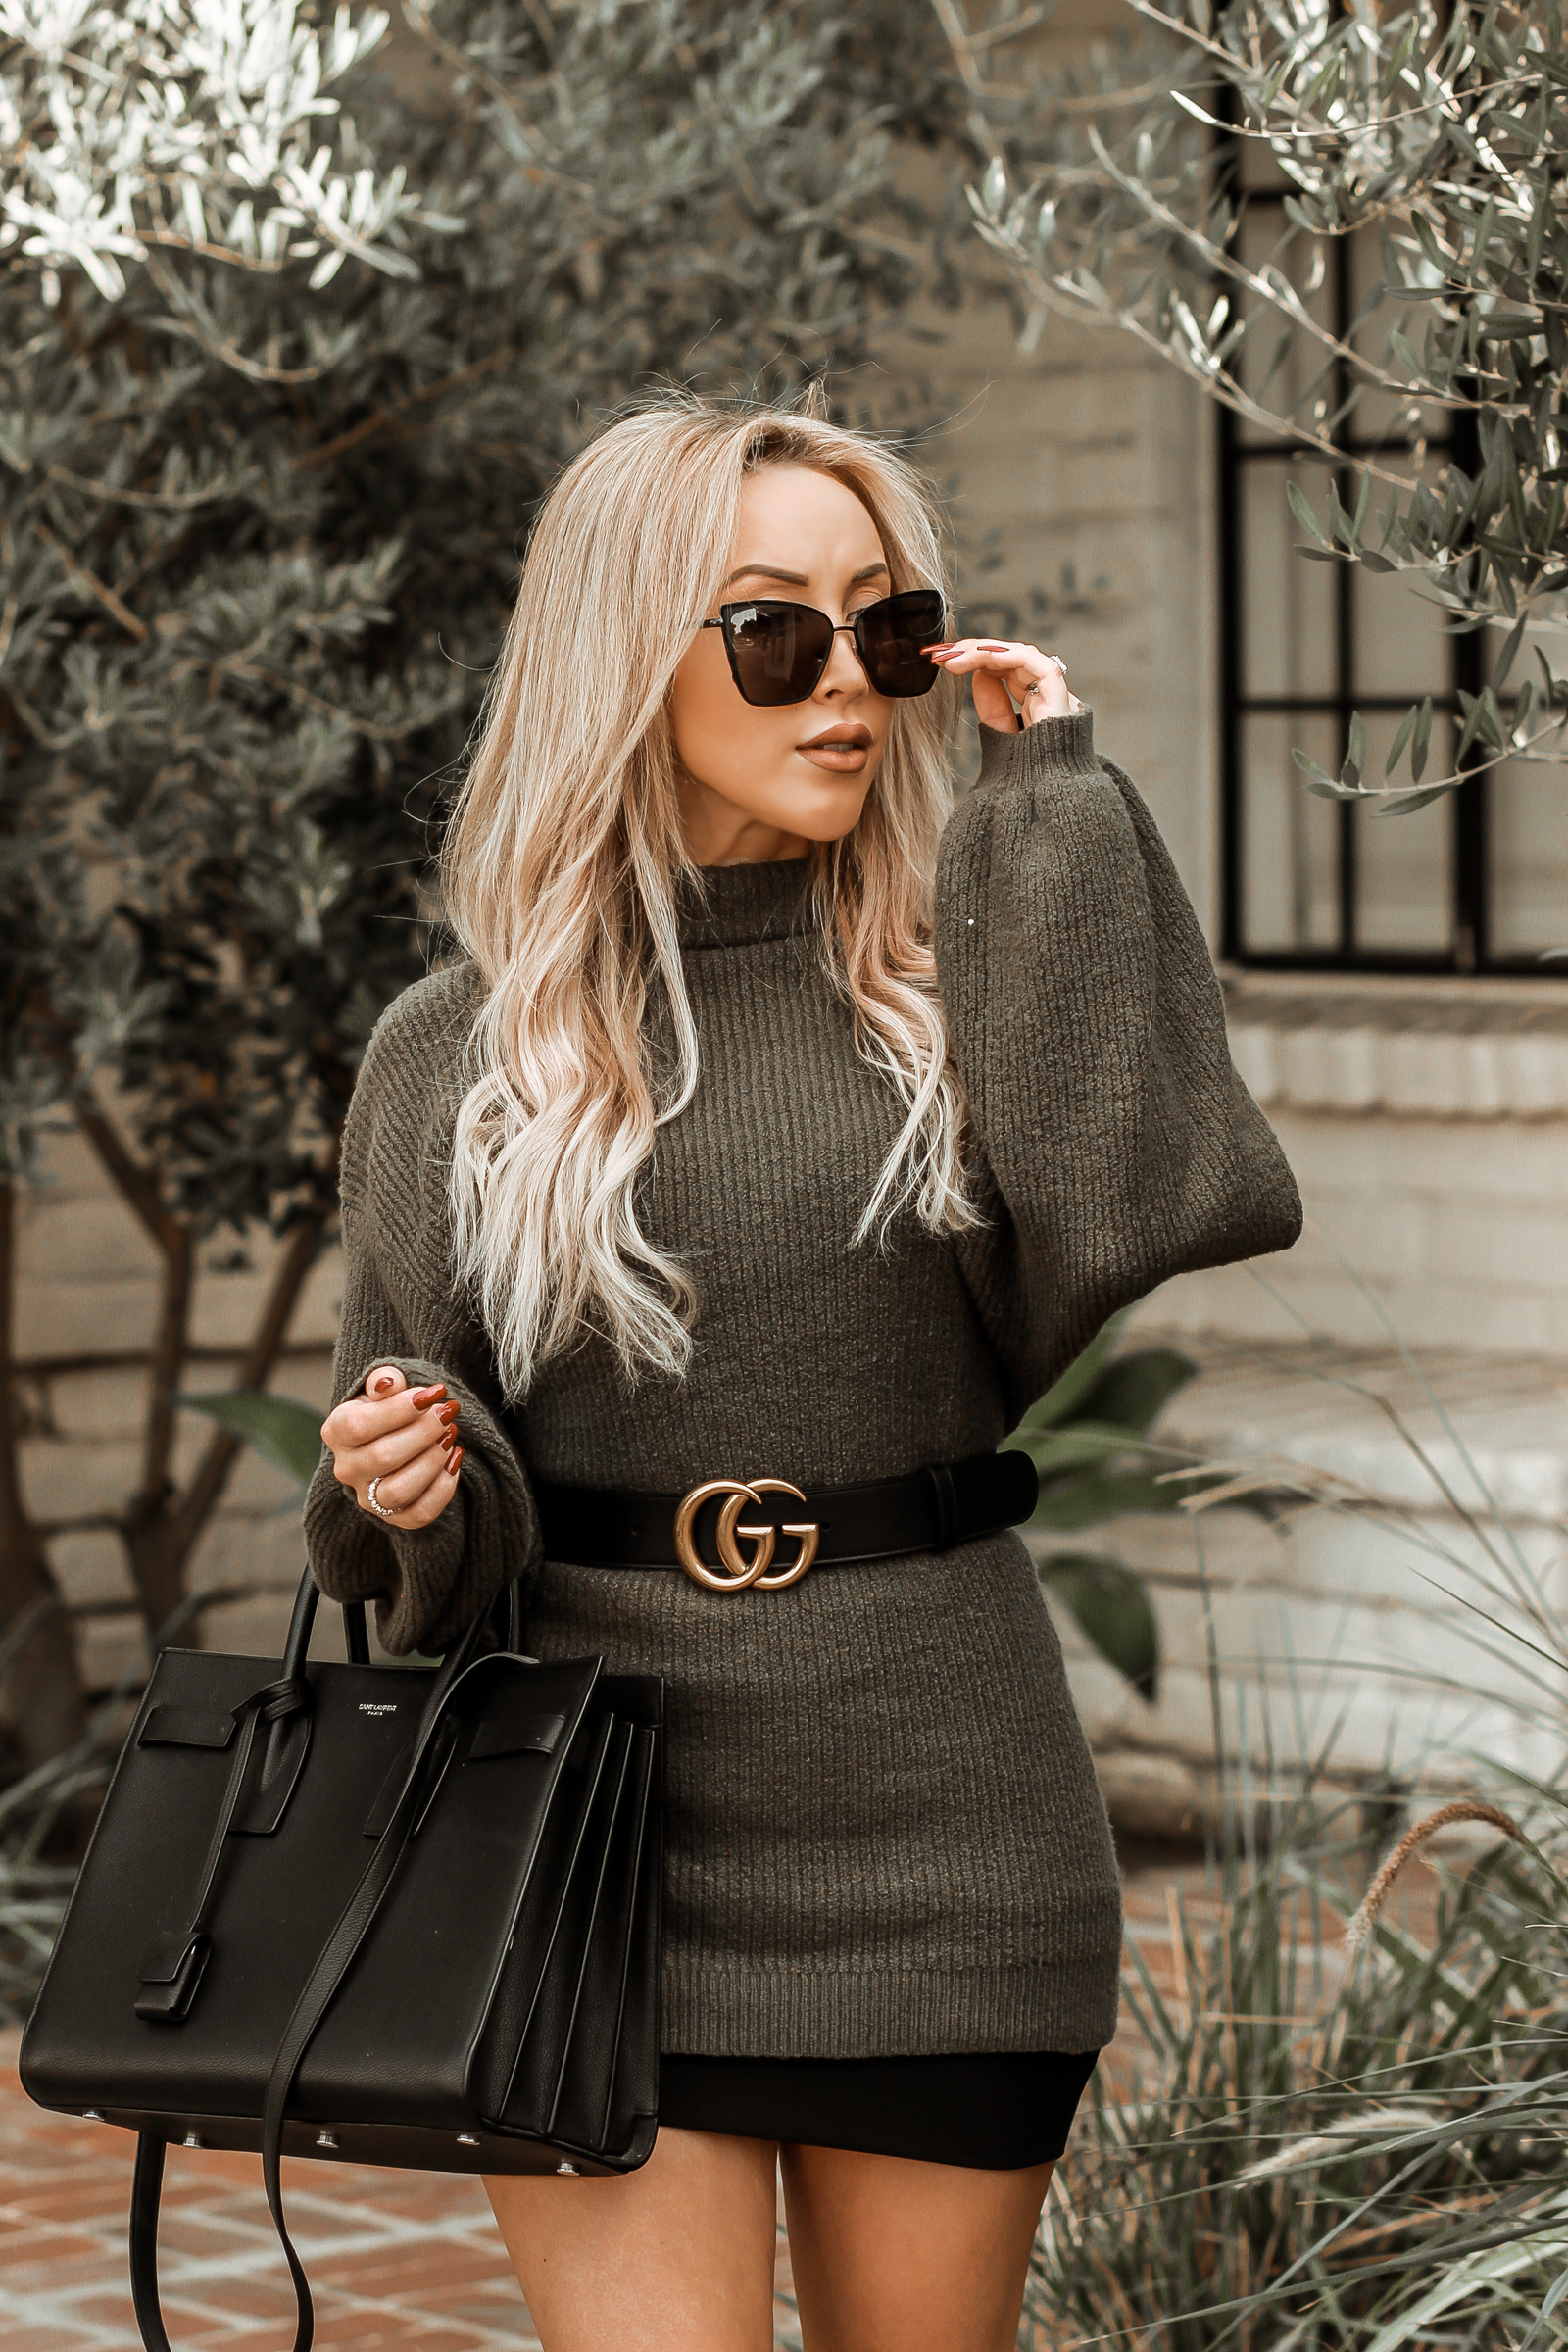 Gucci Belt Styling | Oversized Sweater | Fall Fashion | Holiday Style | Blondie in the City by Hayley Larue